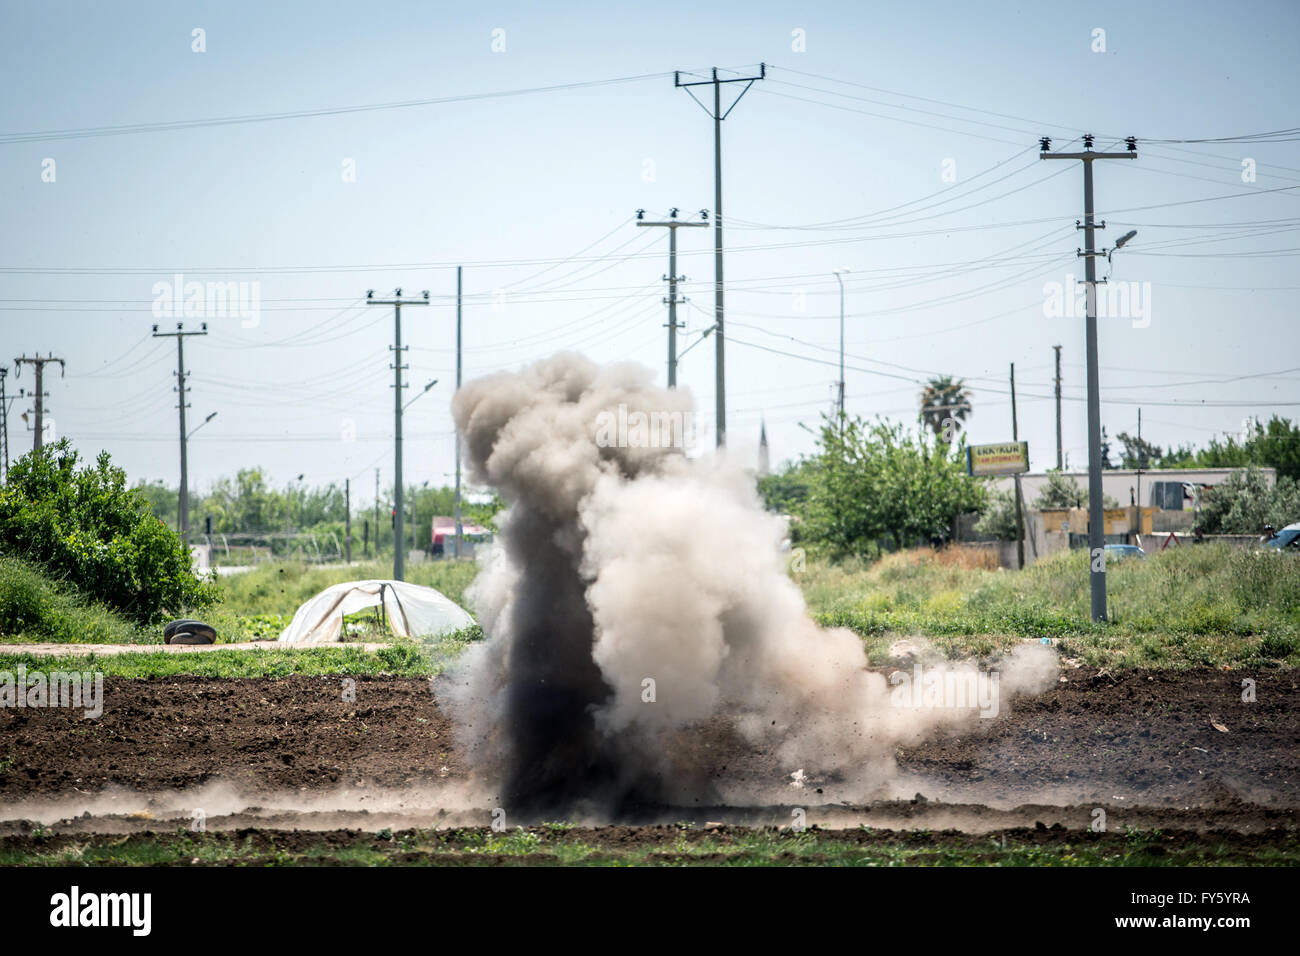 Kilis, Turkey. 22nd Apr, 2016. Unexploded grenades, which fell from the syrian side of the border, are detonated under controlled conditions by Turkish security forces along the border area in Kilis, Turkey, 22 April 2016. Photo: Uygar Onder Simsek/dpa/Alamy Live News Stock Photo